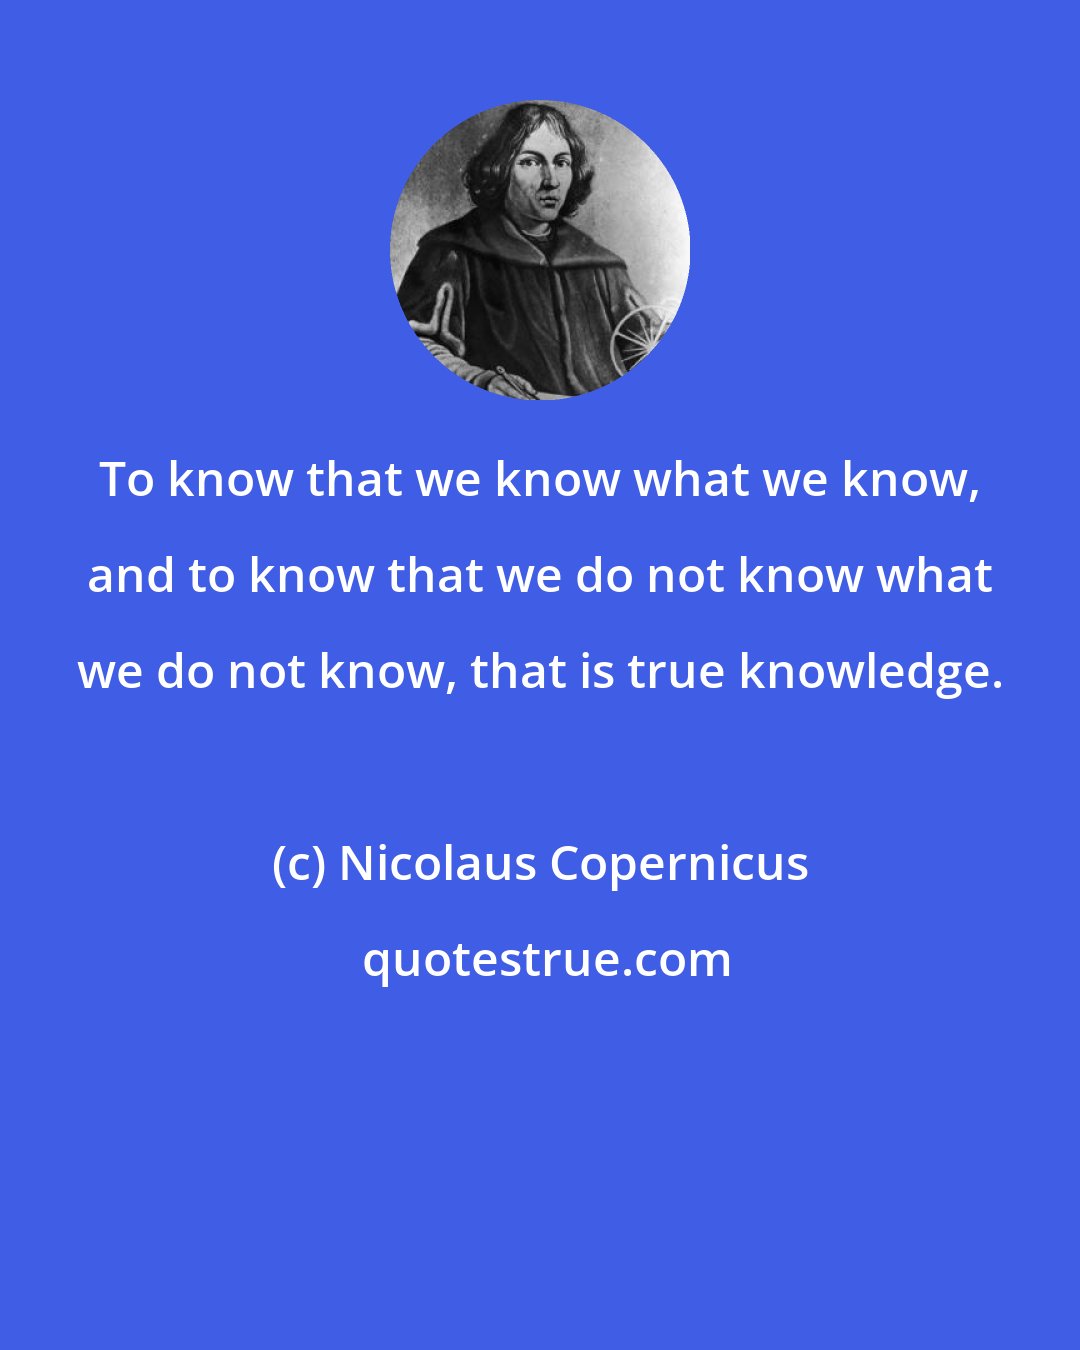 Nicolaus Copernicus: To know that we know what we know, and to know that we do not know what we do not know, that is true knowledge.